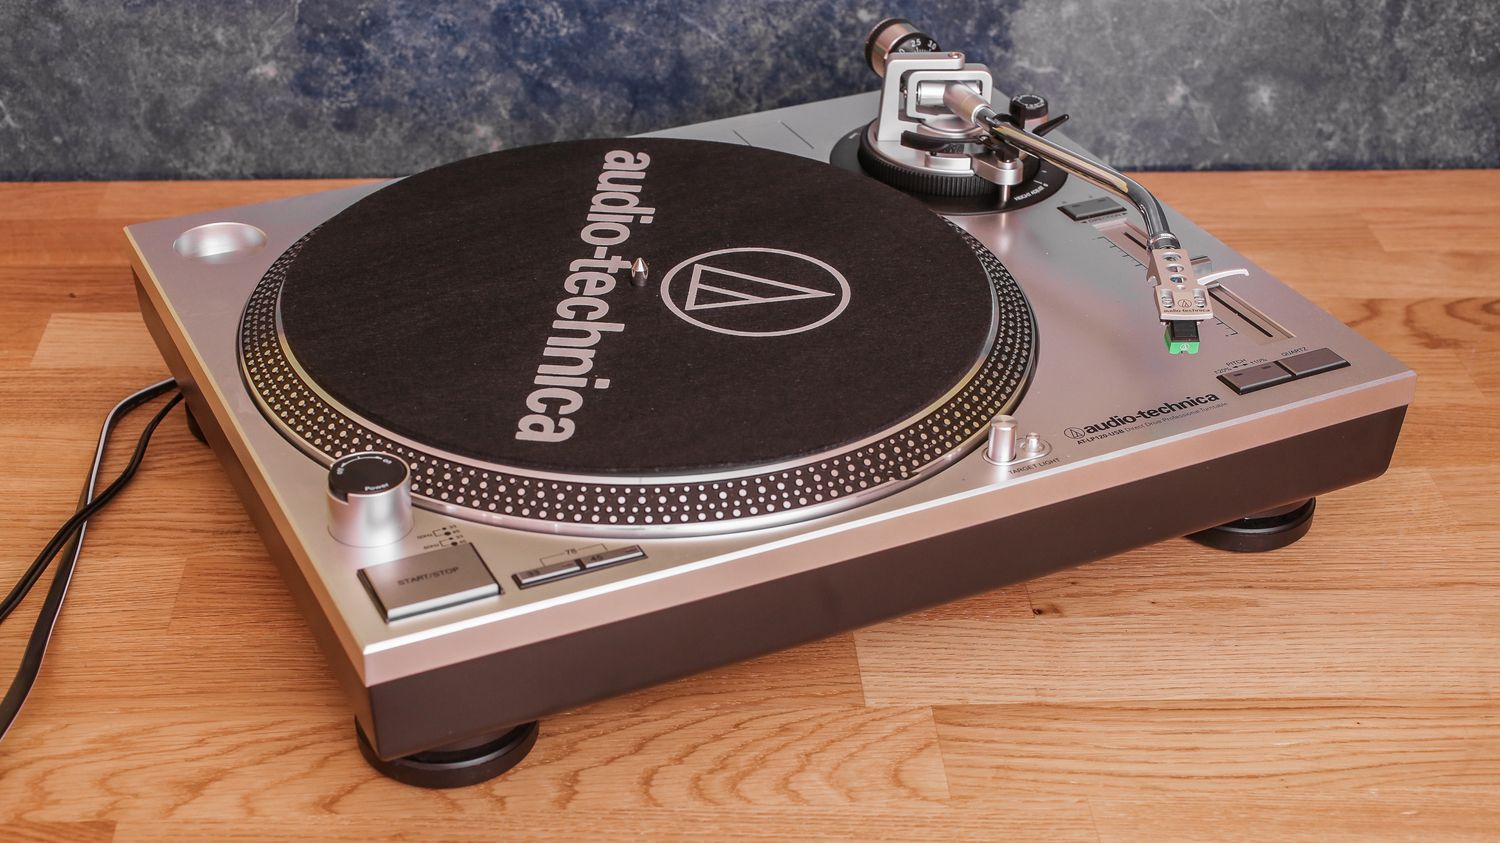 How To Setup An Audio Technica LP120 Turntable